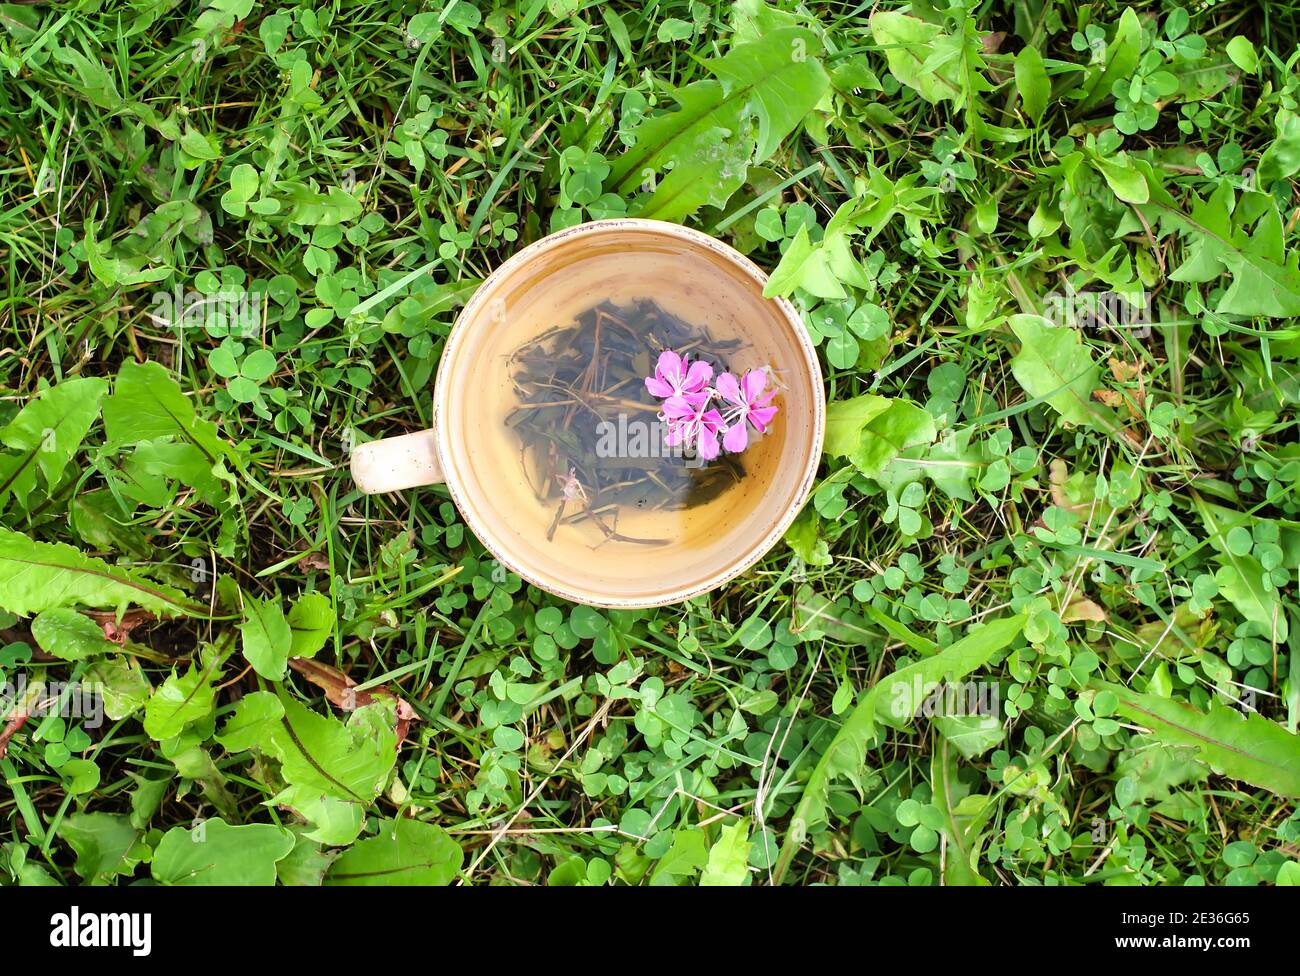 Natural herbal tea with medical fireweed fresh purple flowers and leaves in ceramic cup on green summer grass. Stock Photo